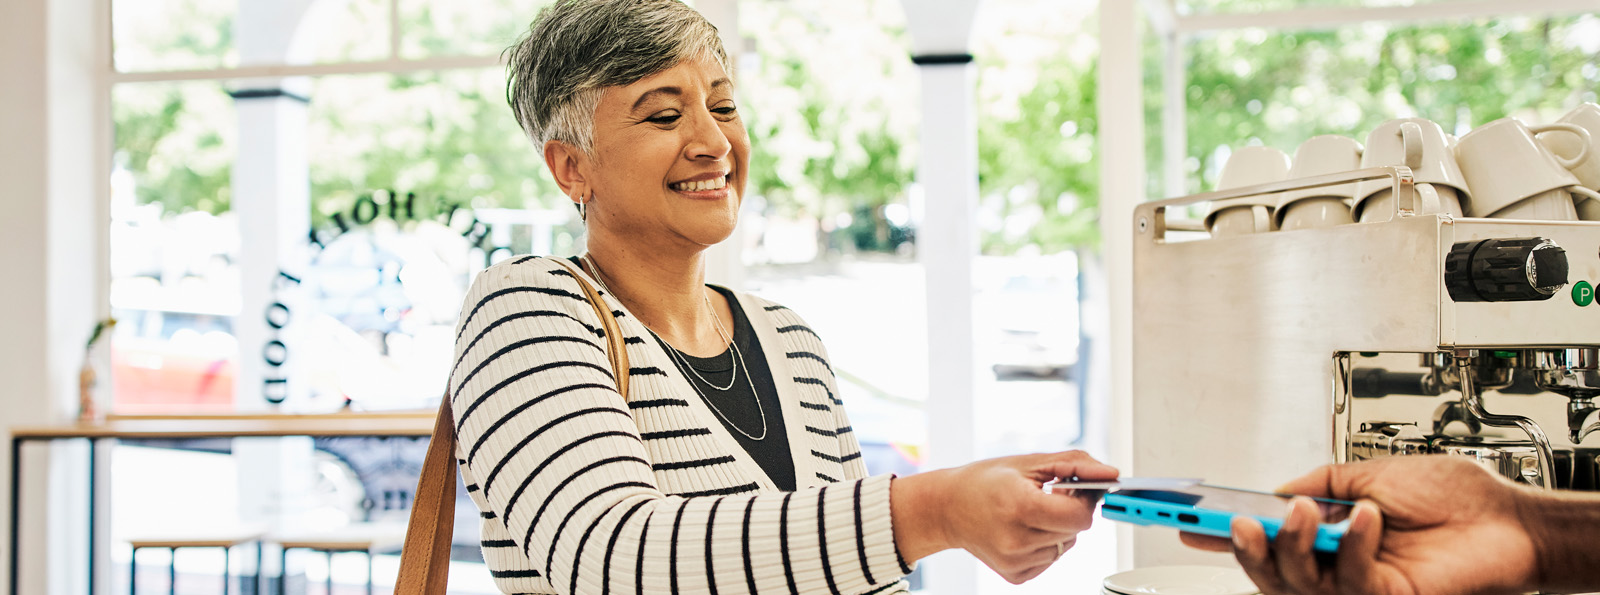 Image of smiling woman holding a credit card making a purchase.